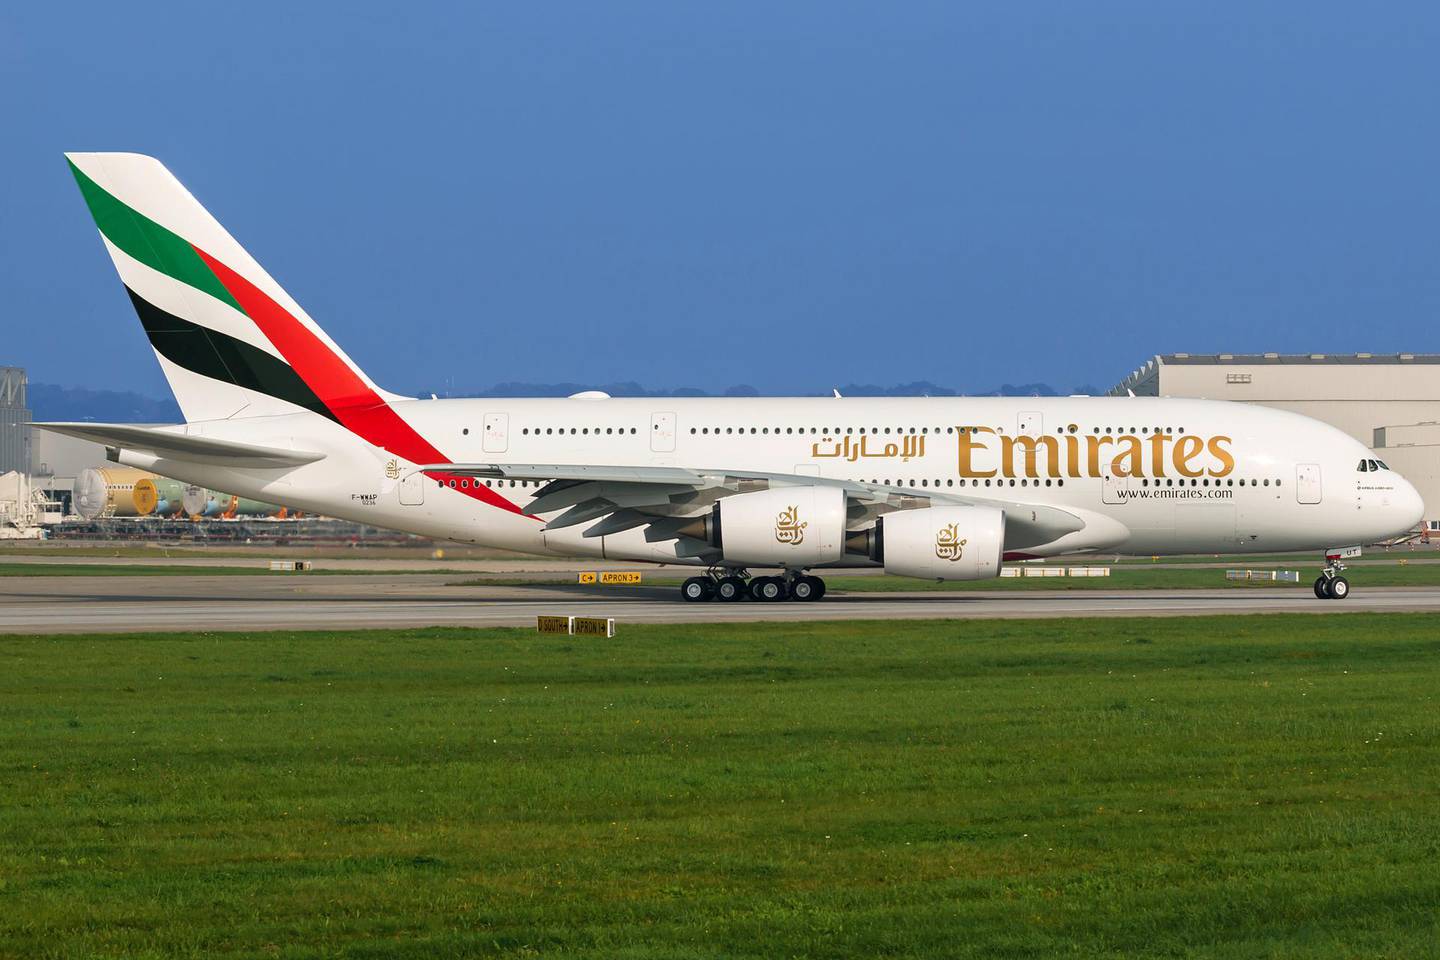 Emirates has introduced flexible booking policies